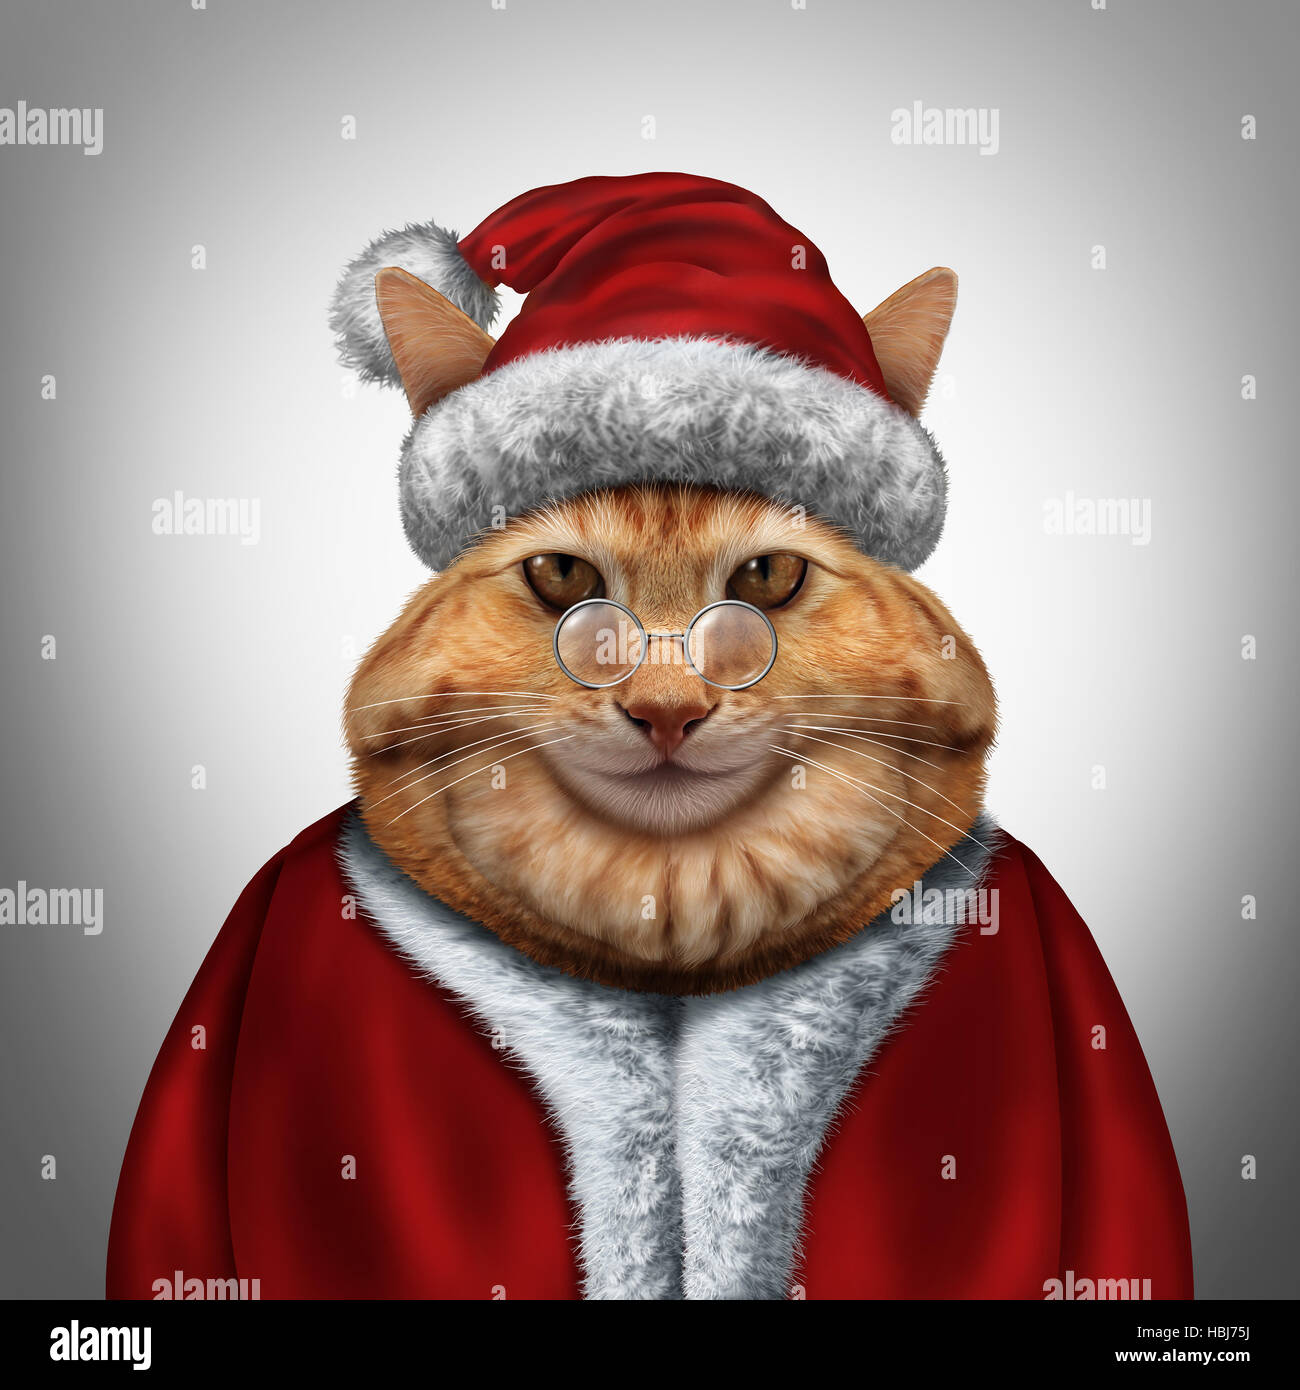 Christmas cat wearing a red santa claus xmas costume as a festive winter celebration feline pet with 3D illustration elements. Stock Photo